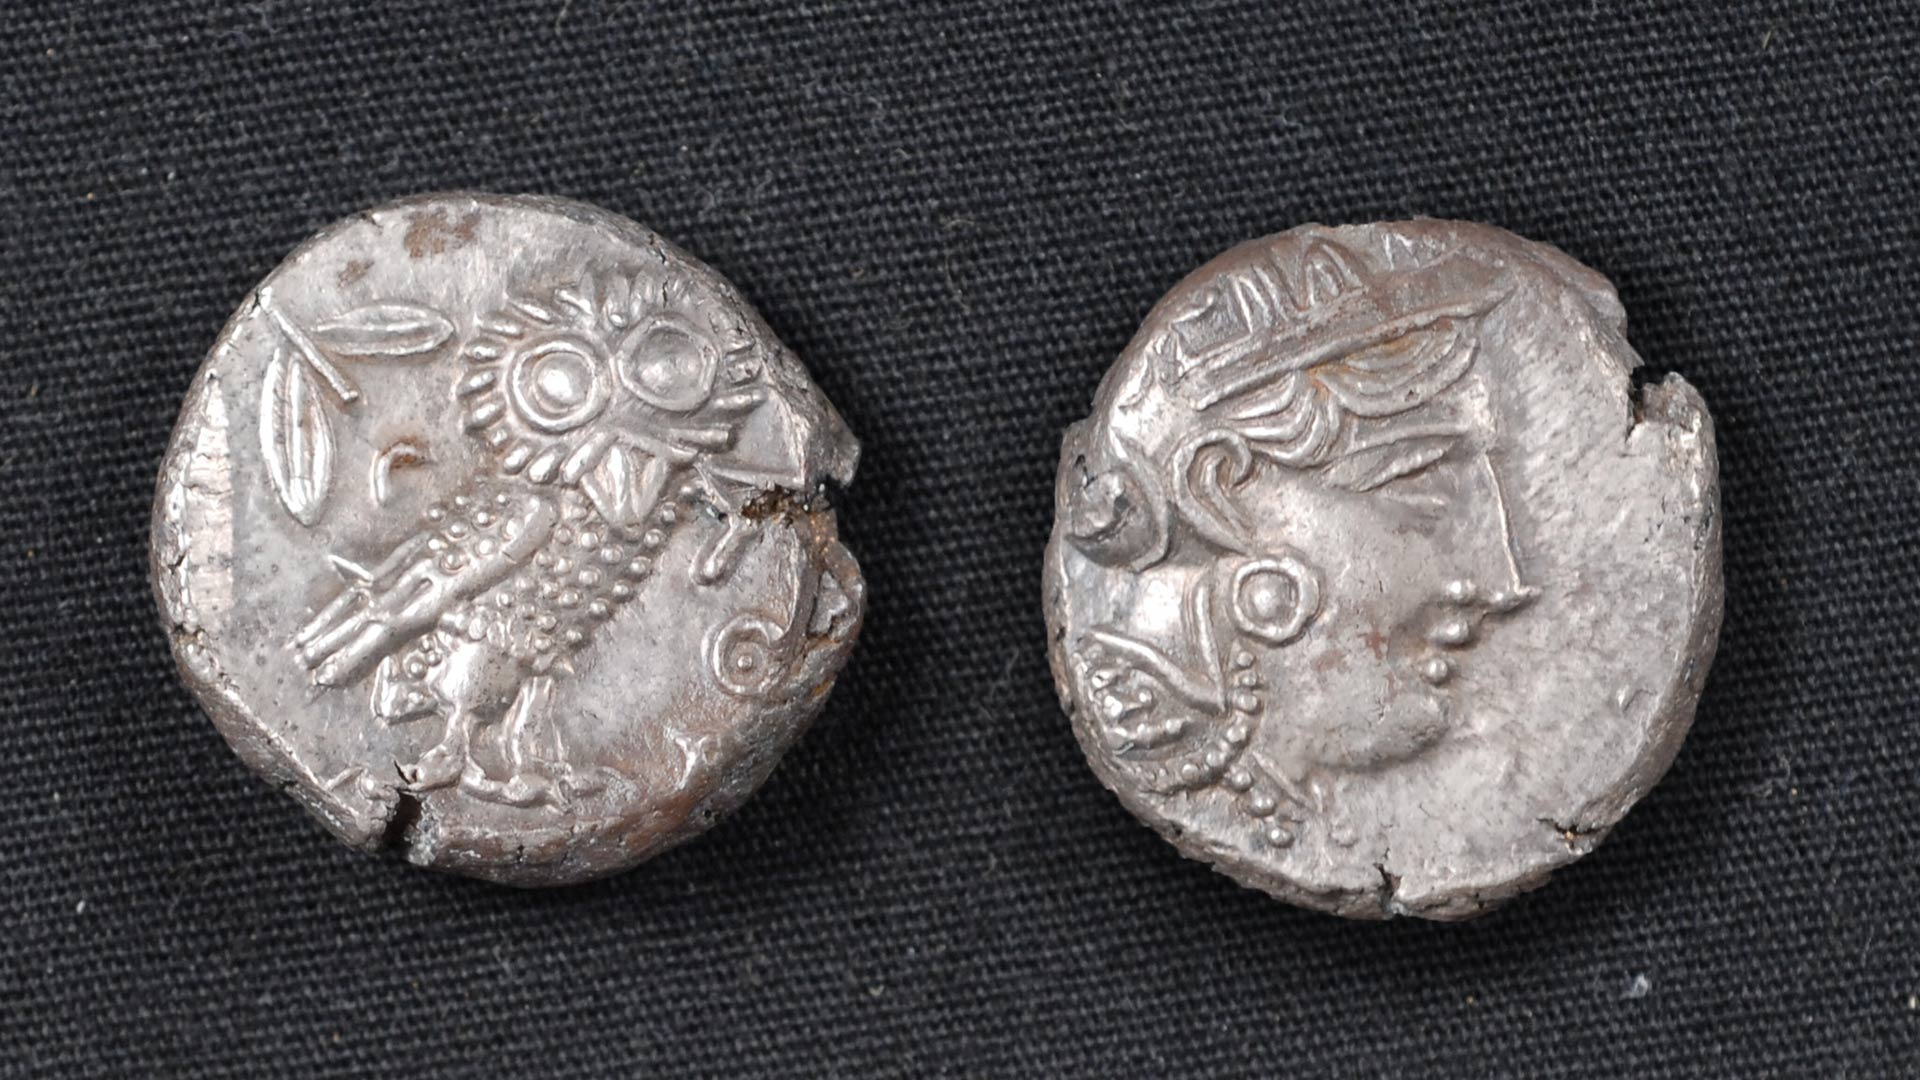 Two Ancient Athenian coins, one featuring an image the Owl of Athena, the other featuring an image of a person's face.